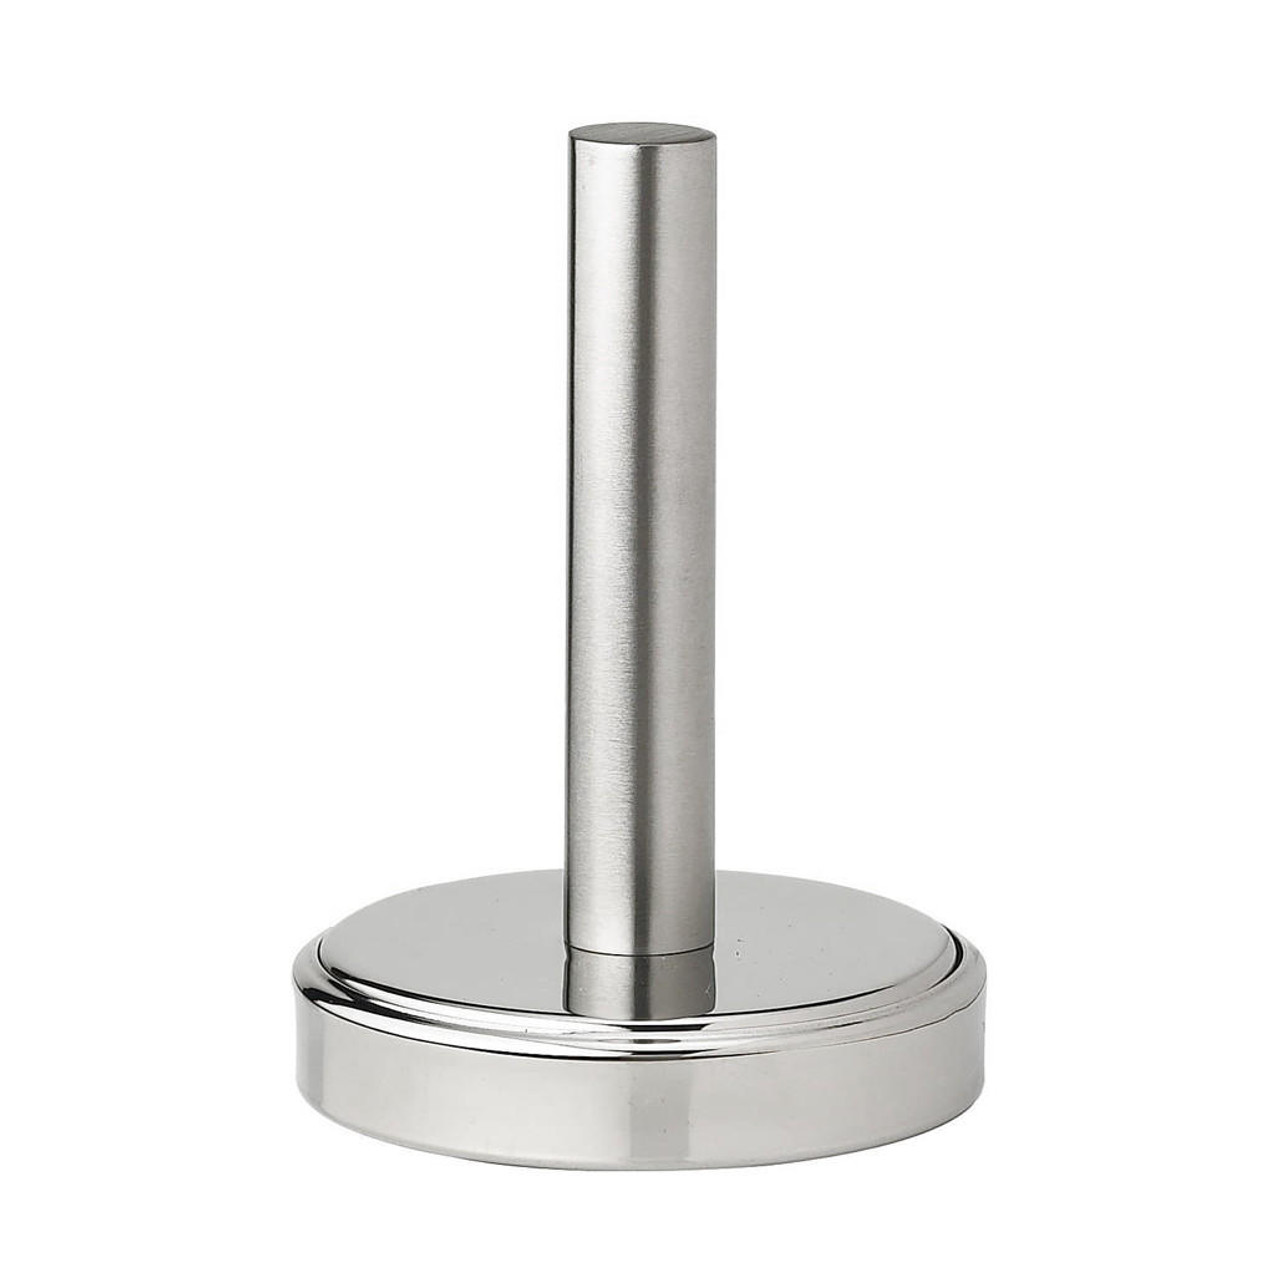 Due Buoi Small Stainless Steel Meat Pounder